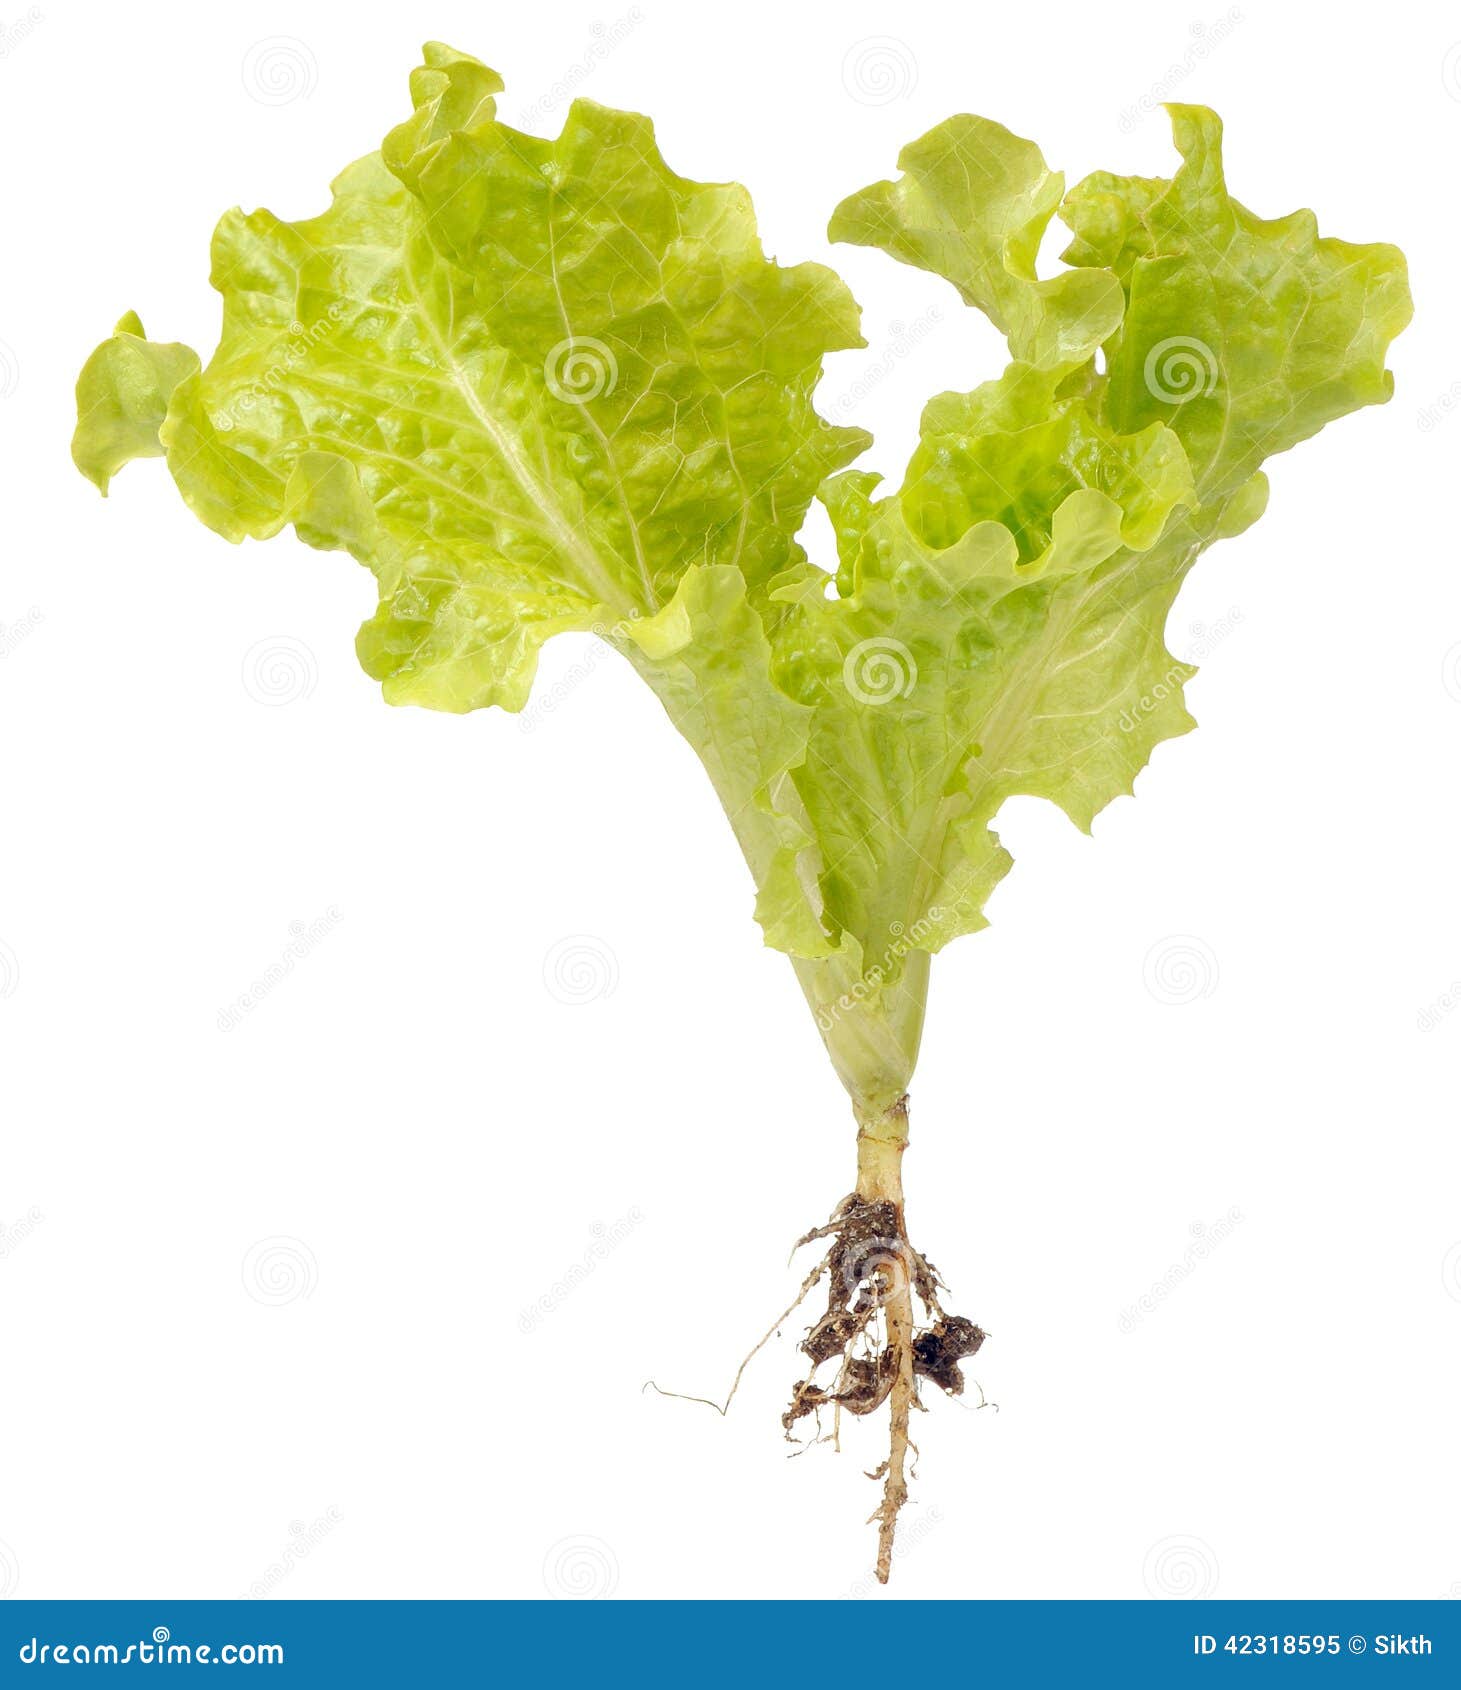 Green Lettuce With Roots Isolated On White Background 